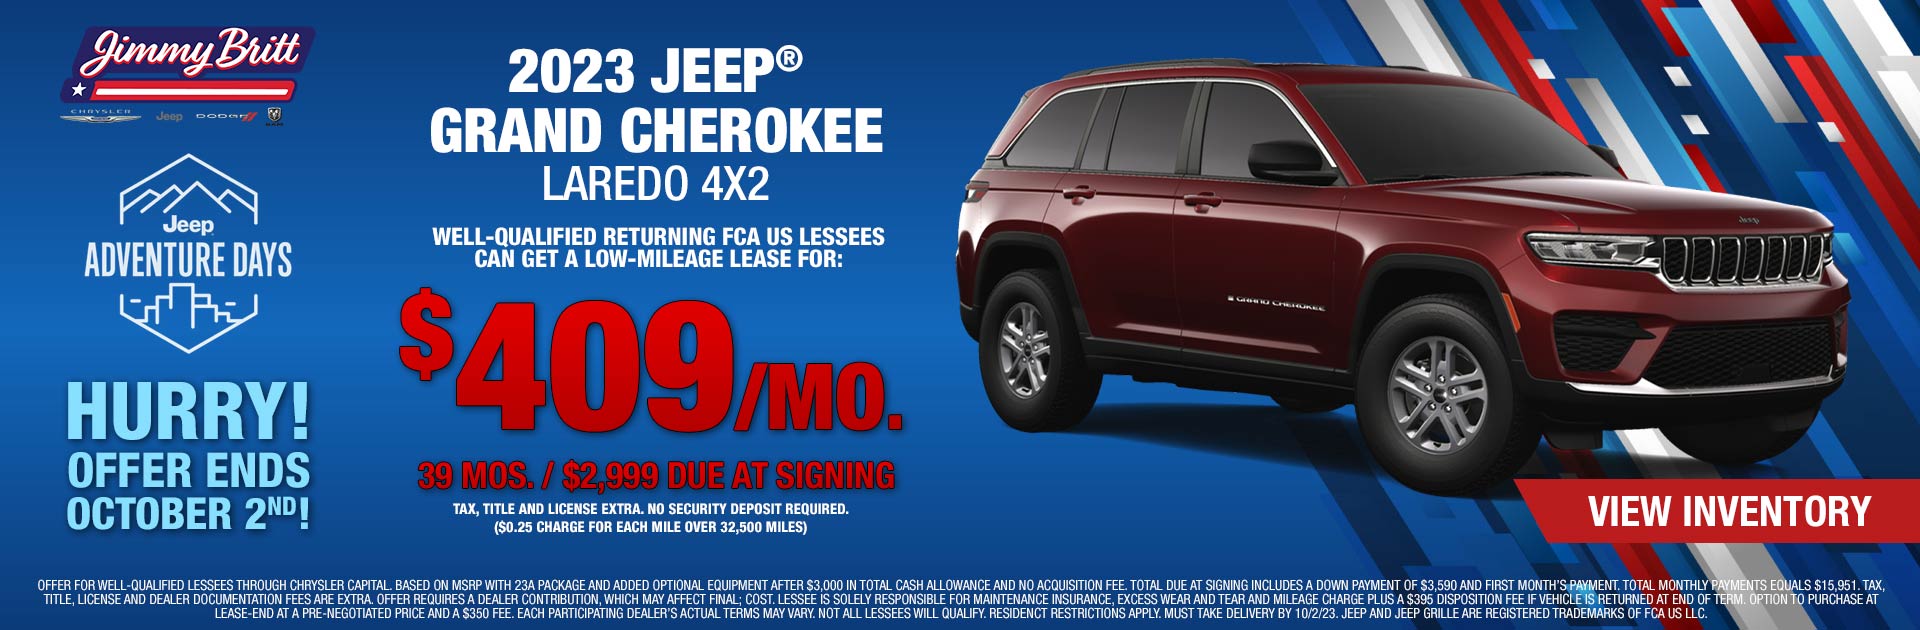 2023 Jeep Grand Cherokee Laredo: Lease for $409/mo. for 39 months with $2,999 due at signing!